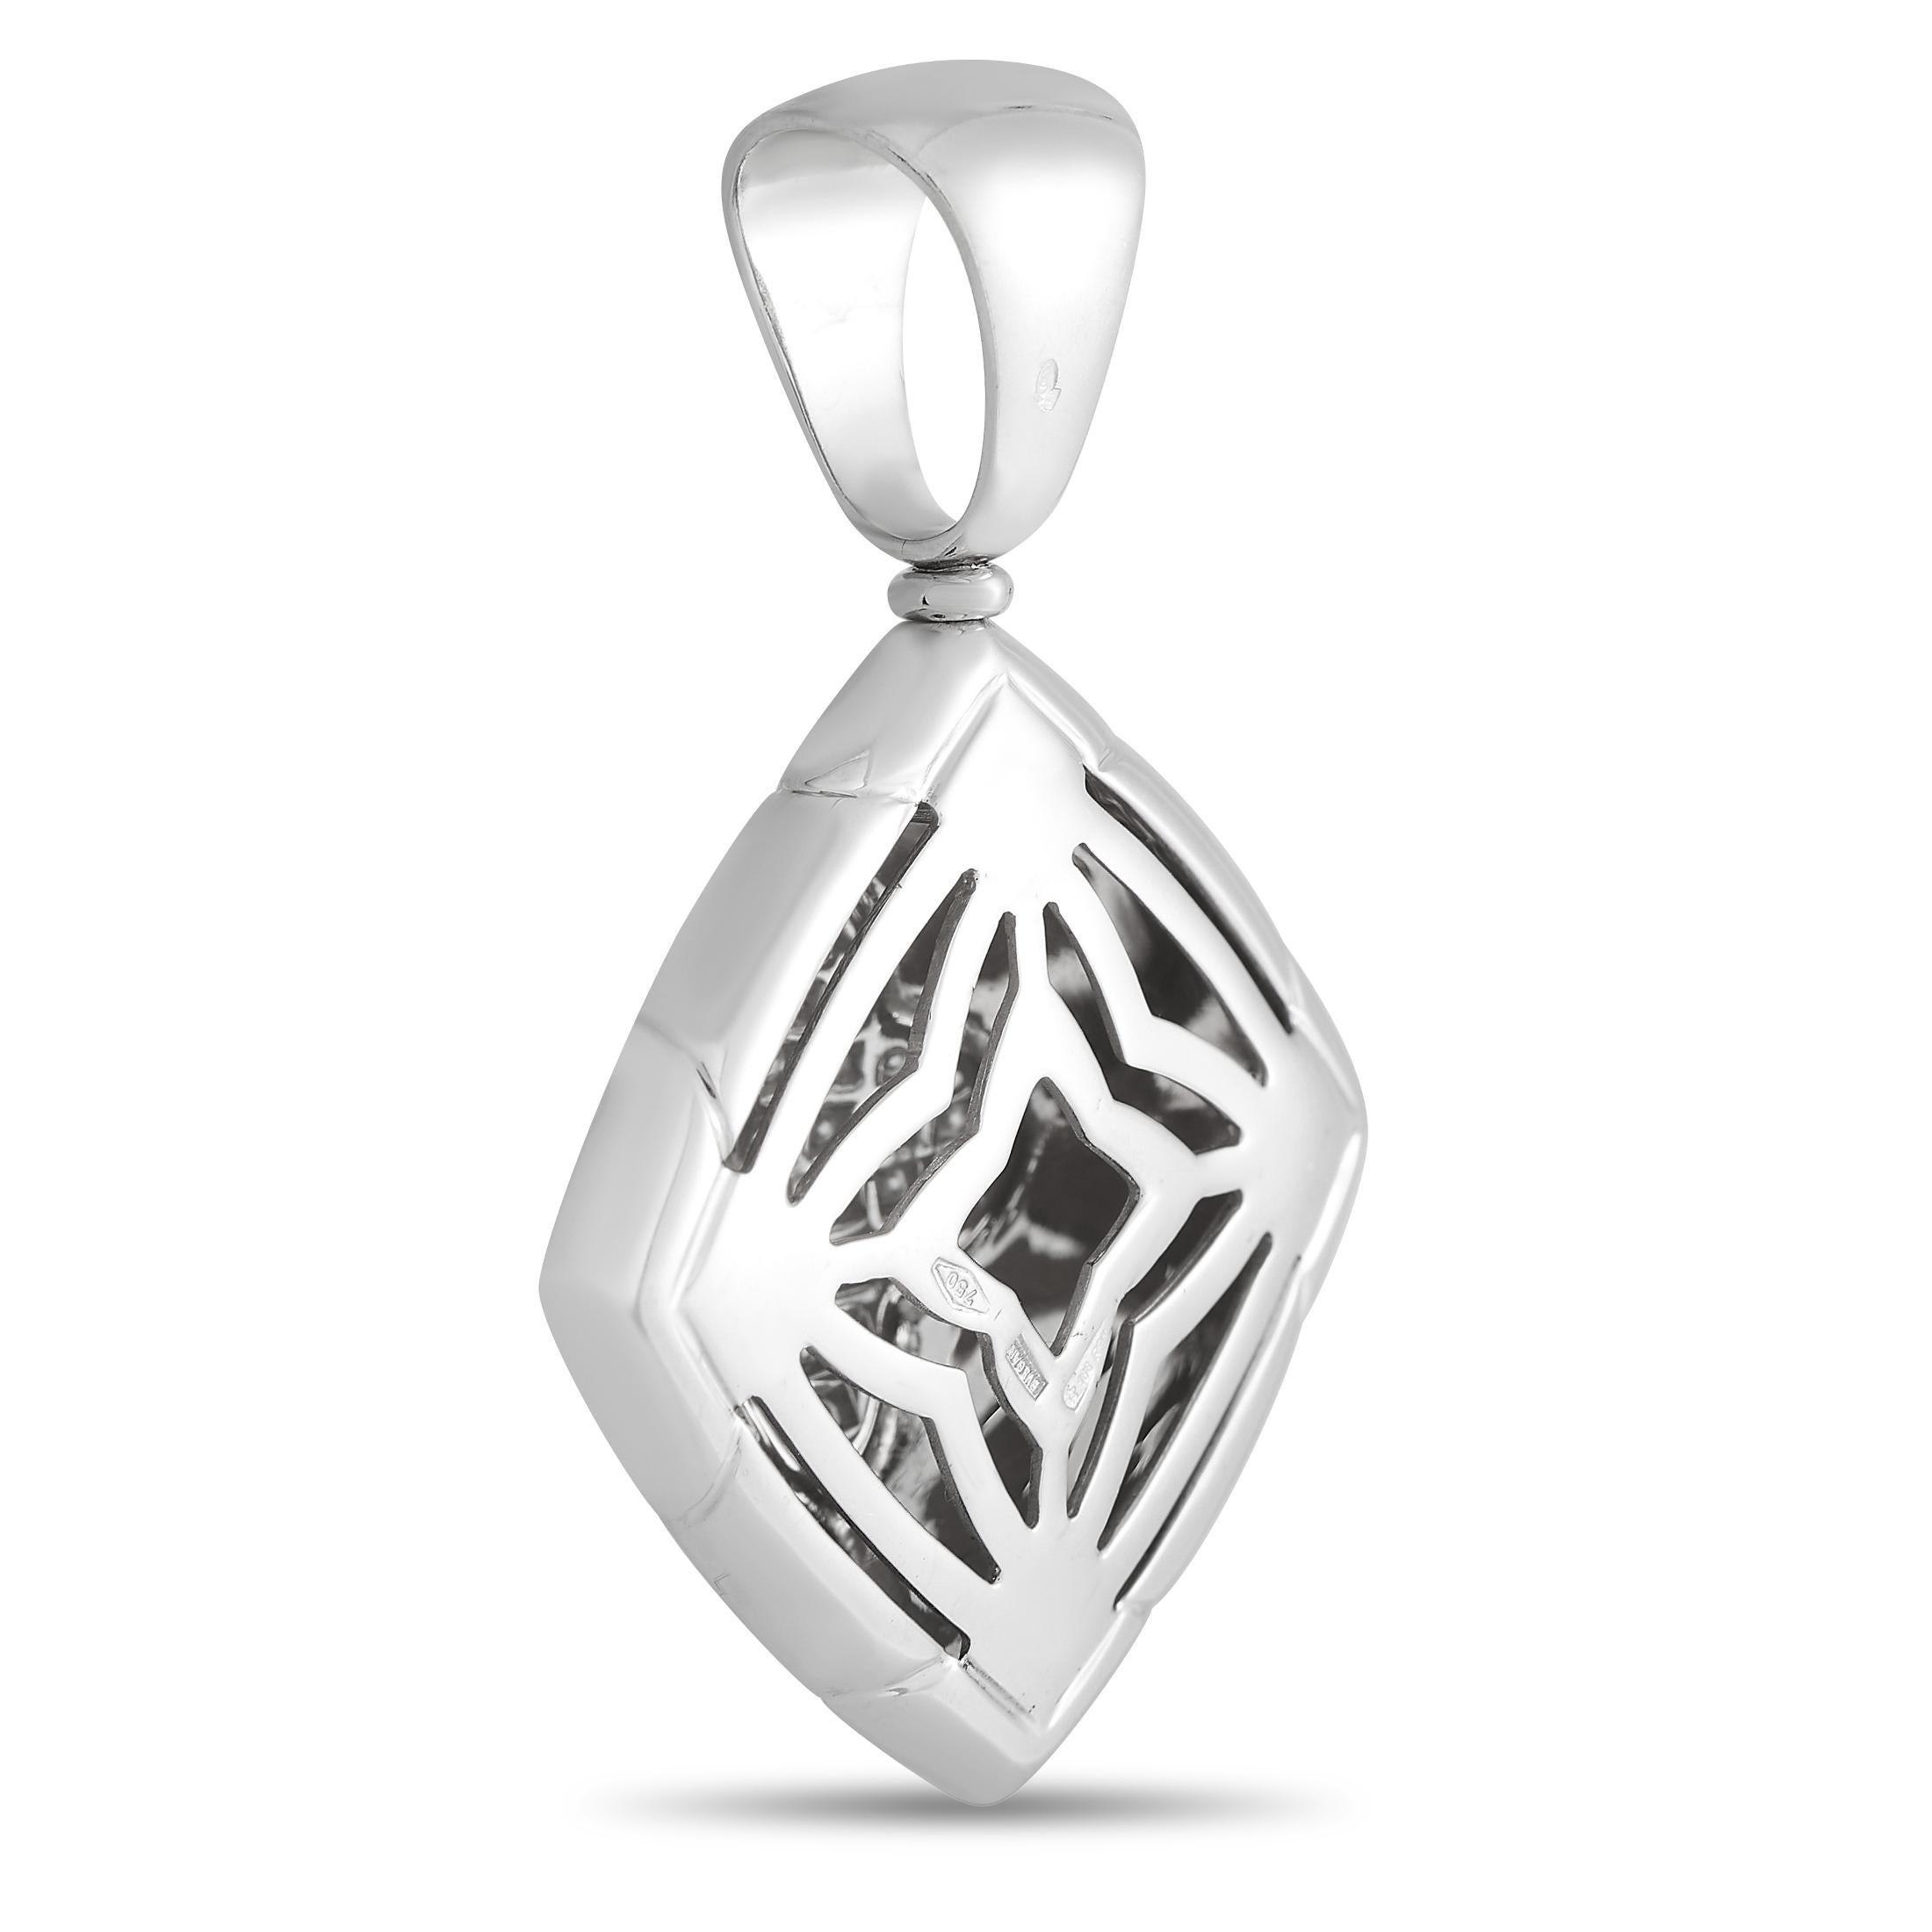 Clean lines and a classic sense of style are the hallmarks of this Bvlgari Pyramid Pendant. Sparkling diamonds in a geometric arrangement add sparkle to the simple 18k White Gold setting, which measures 1.75” long by 1.25” wide. 